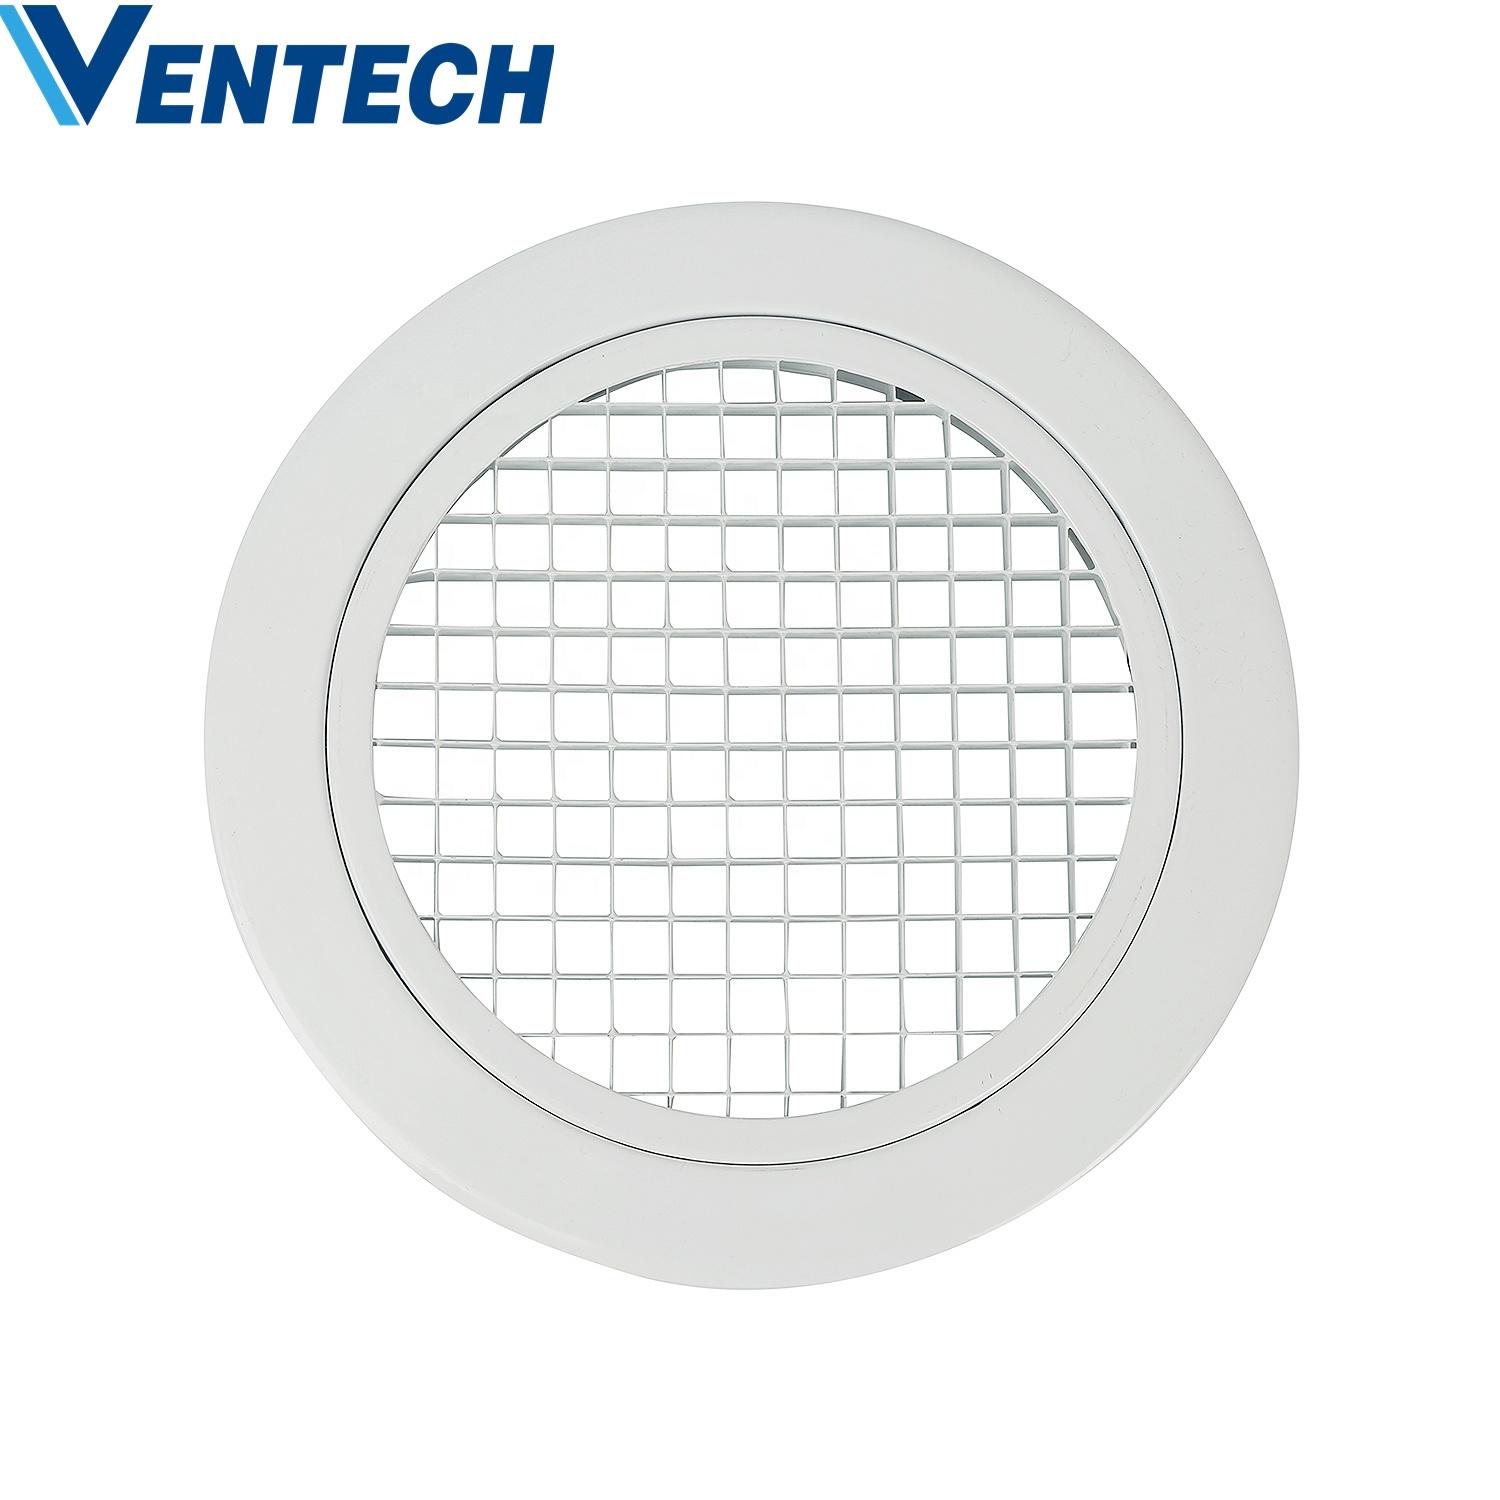 VENTECH Abs Ceiling Air Vent Circular Diffuser Plastic Round Eggcrate Grilles For Kitchen Ventilation